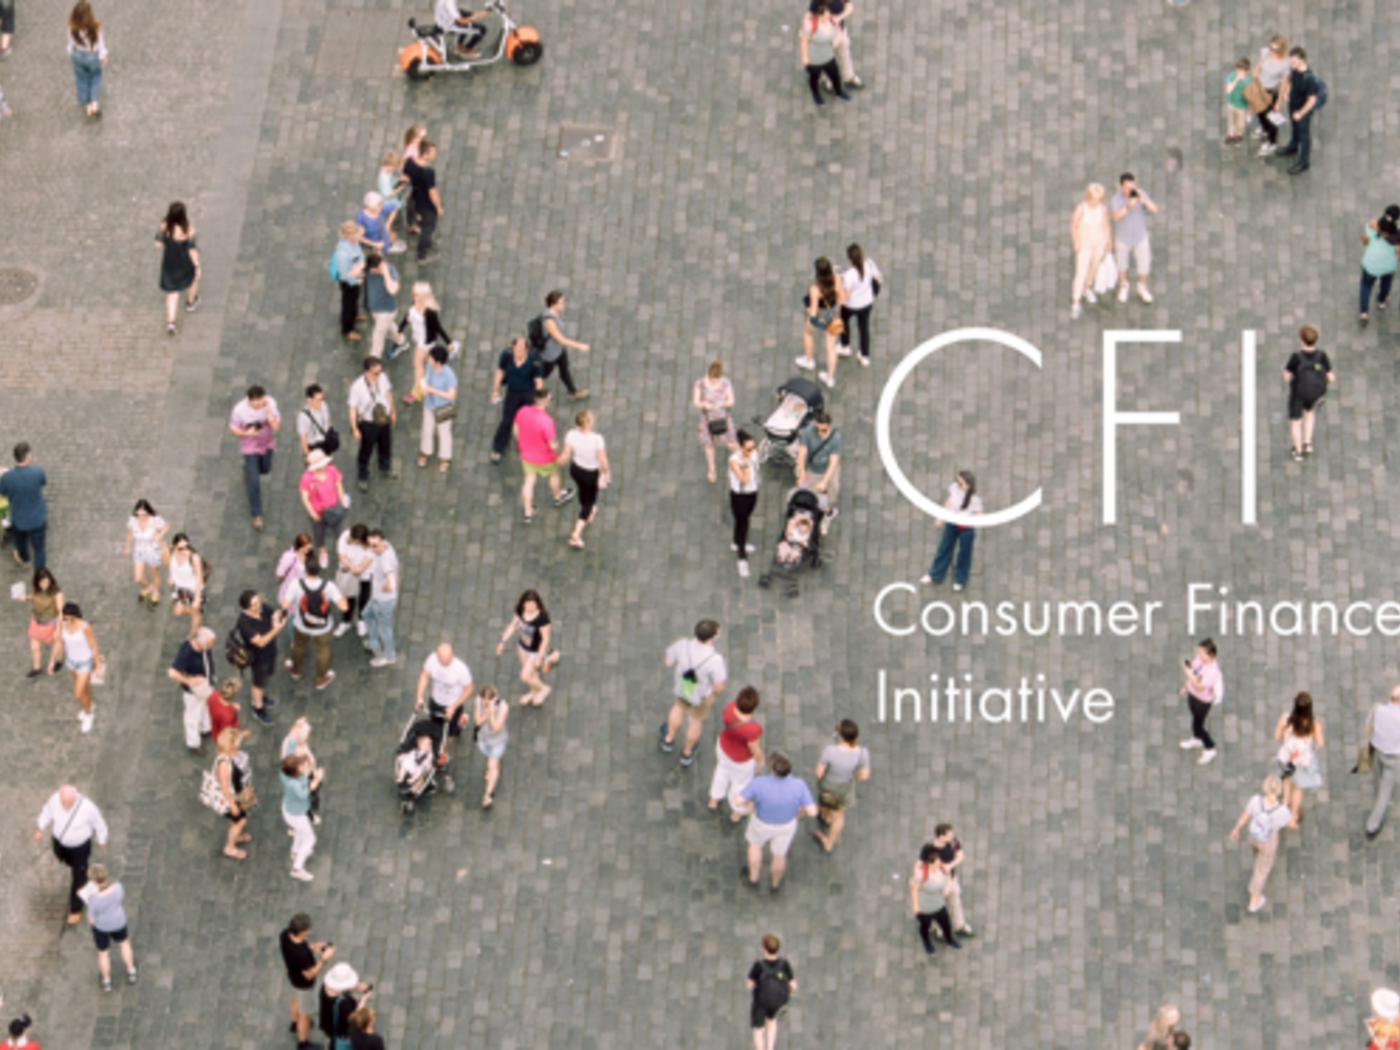 Birdseye view of a crowd of people with Consumer Finance Initiative logo over it